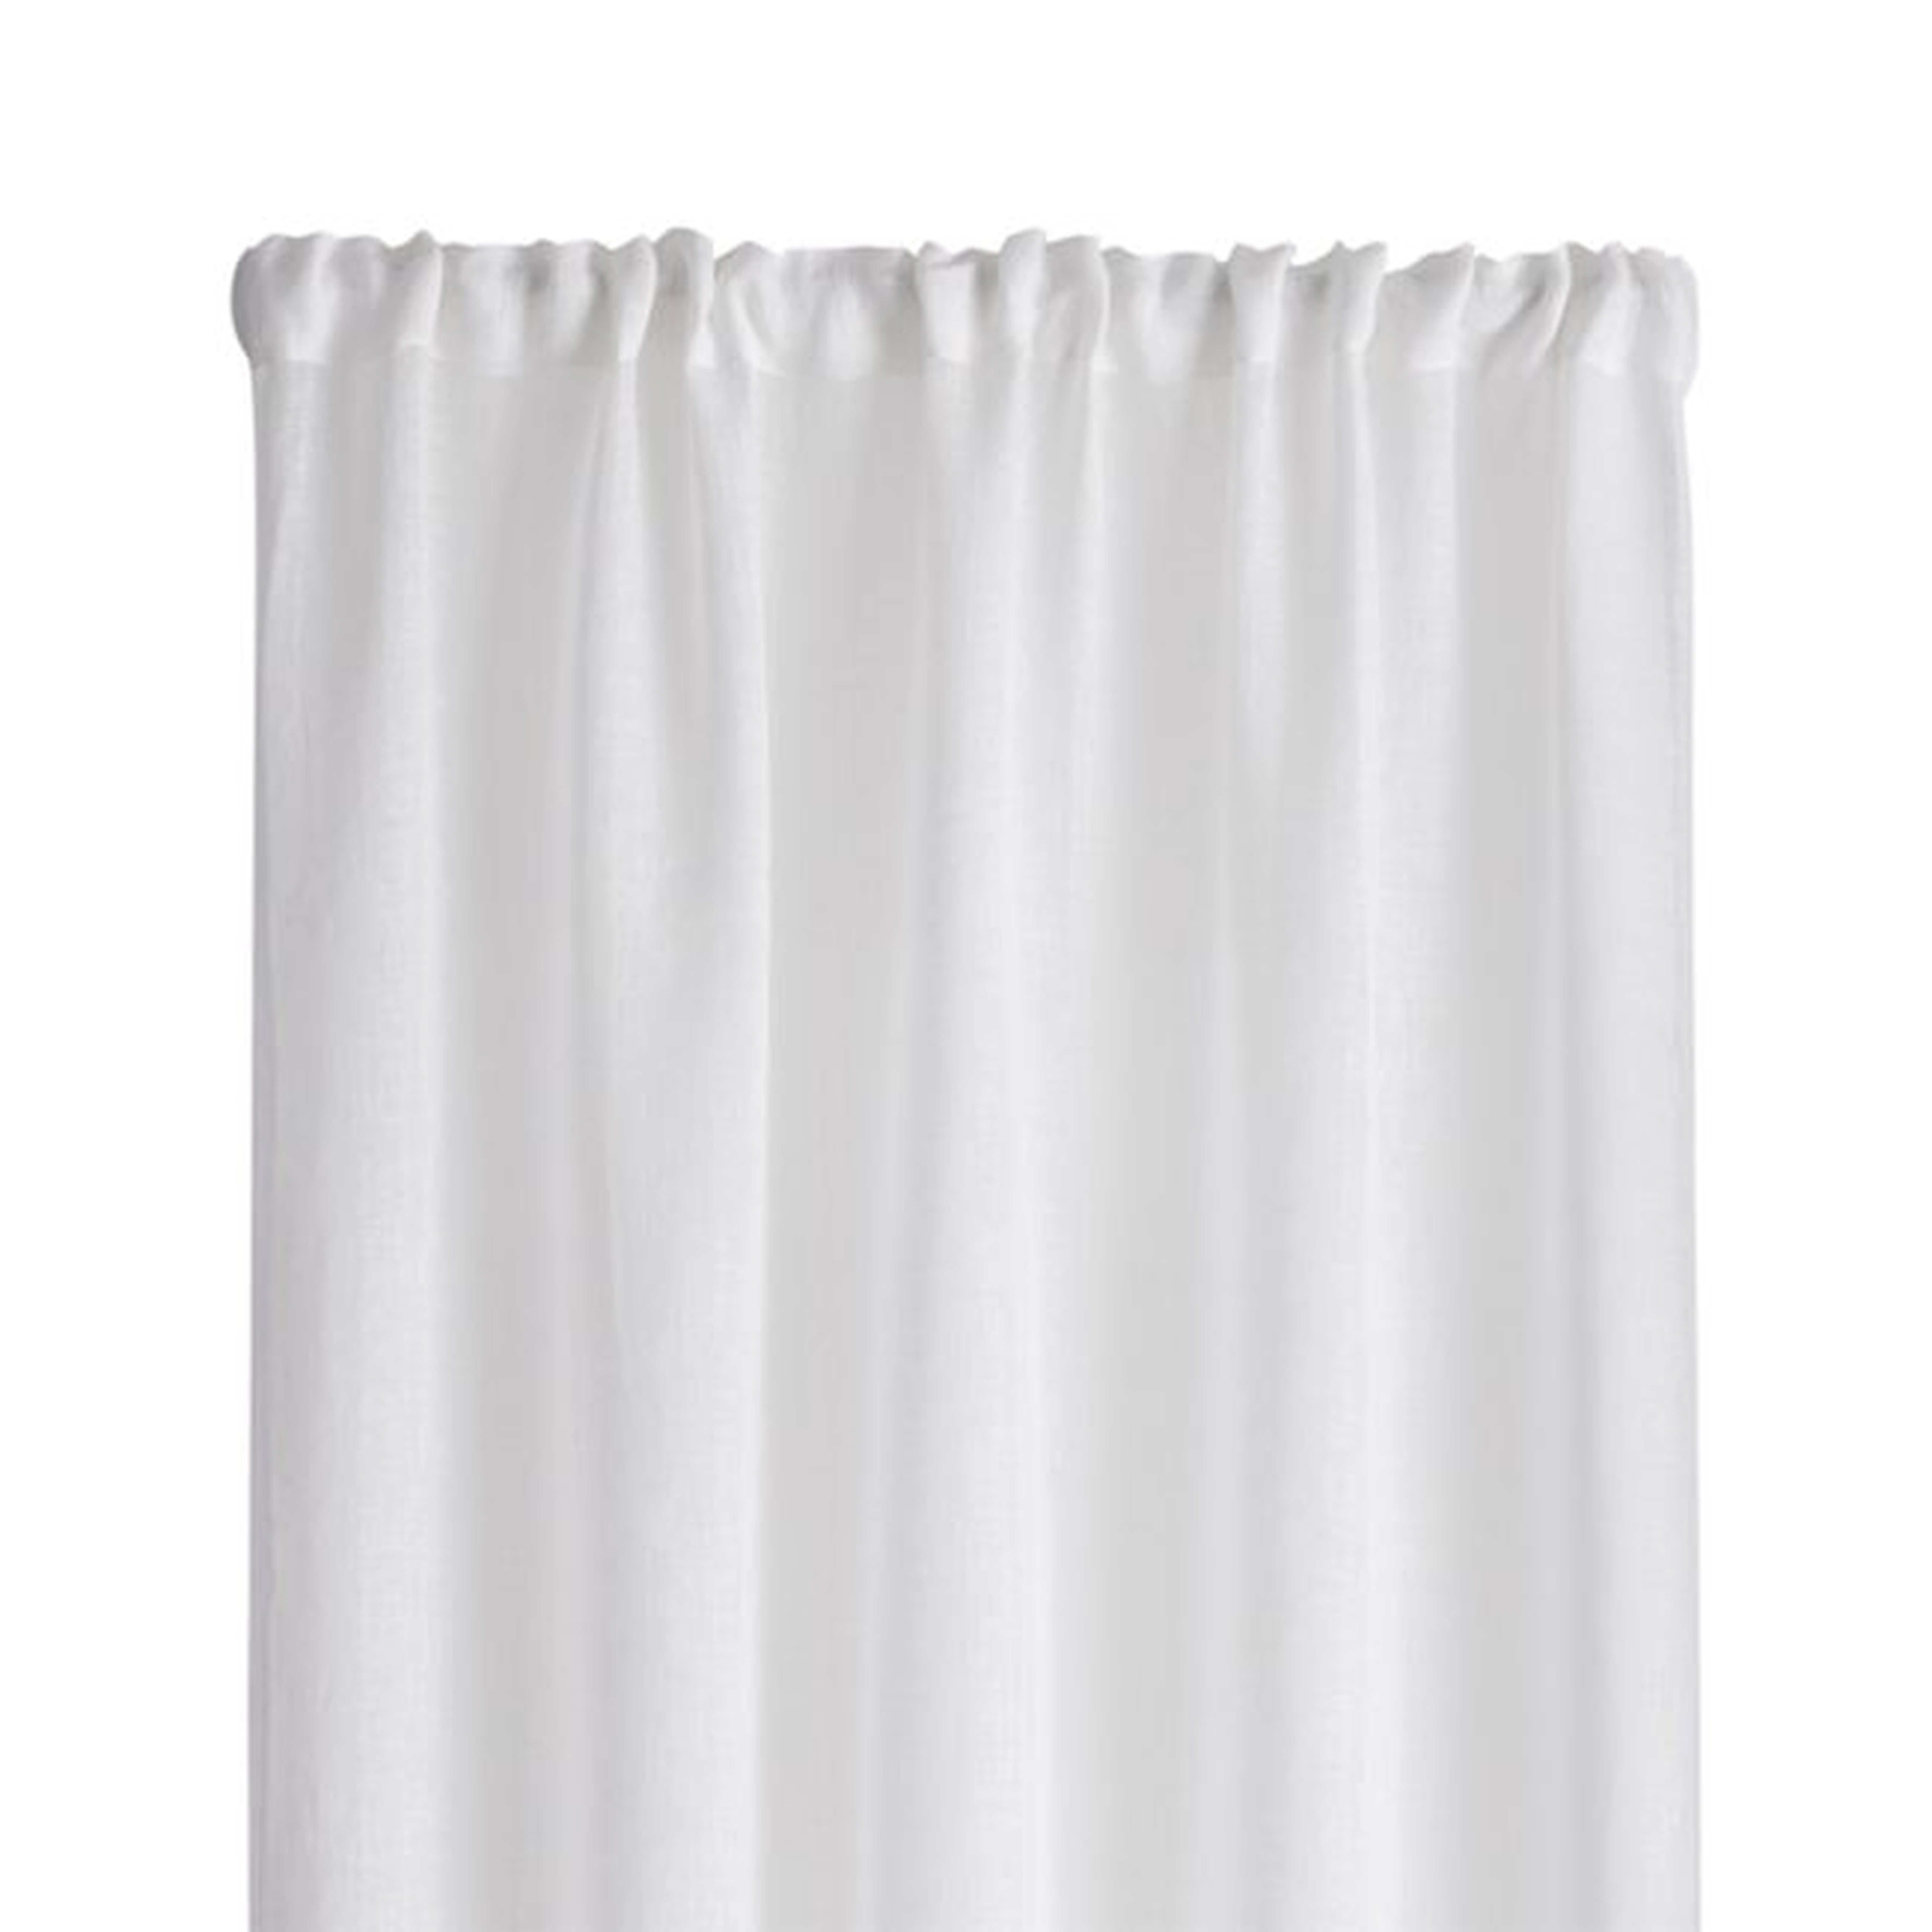 Linen Sheer 52"x96" White Curtain Panel - Crate and Barrel